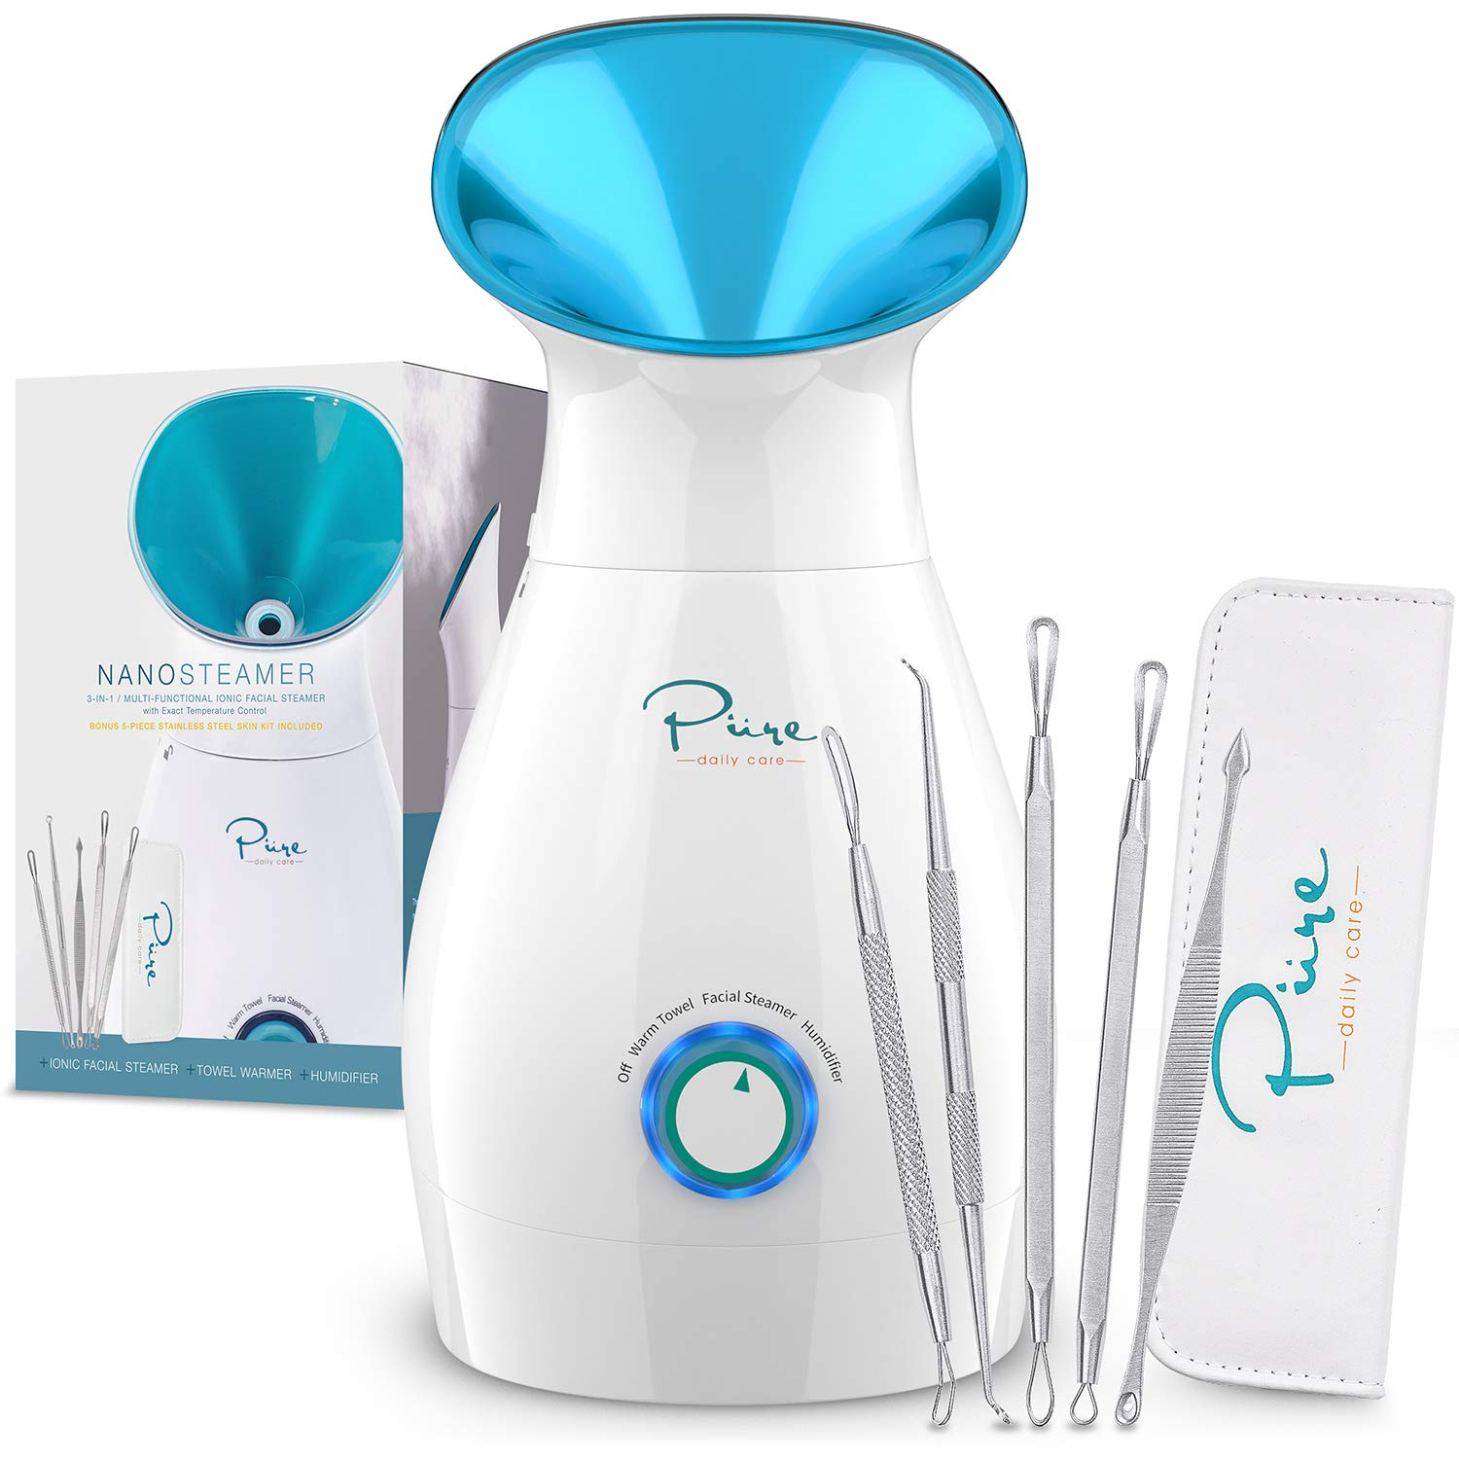 A blue pure daily care nano facial steamer and included stainless steel extraction tools